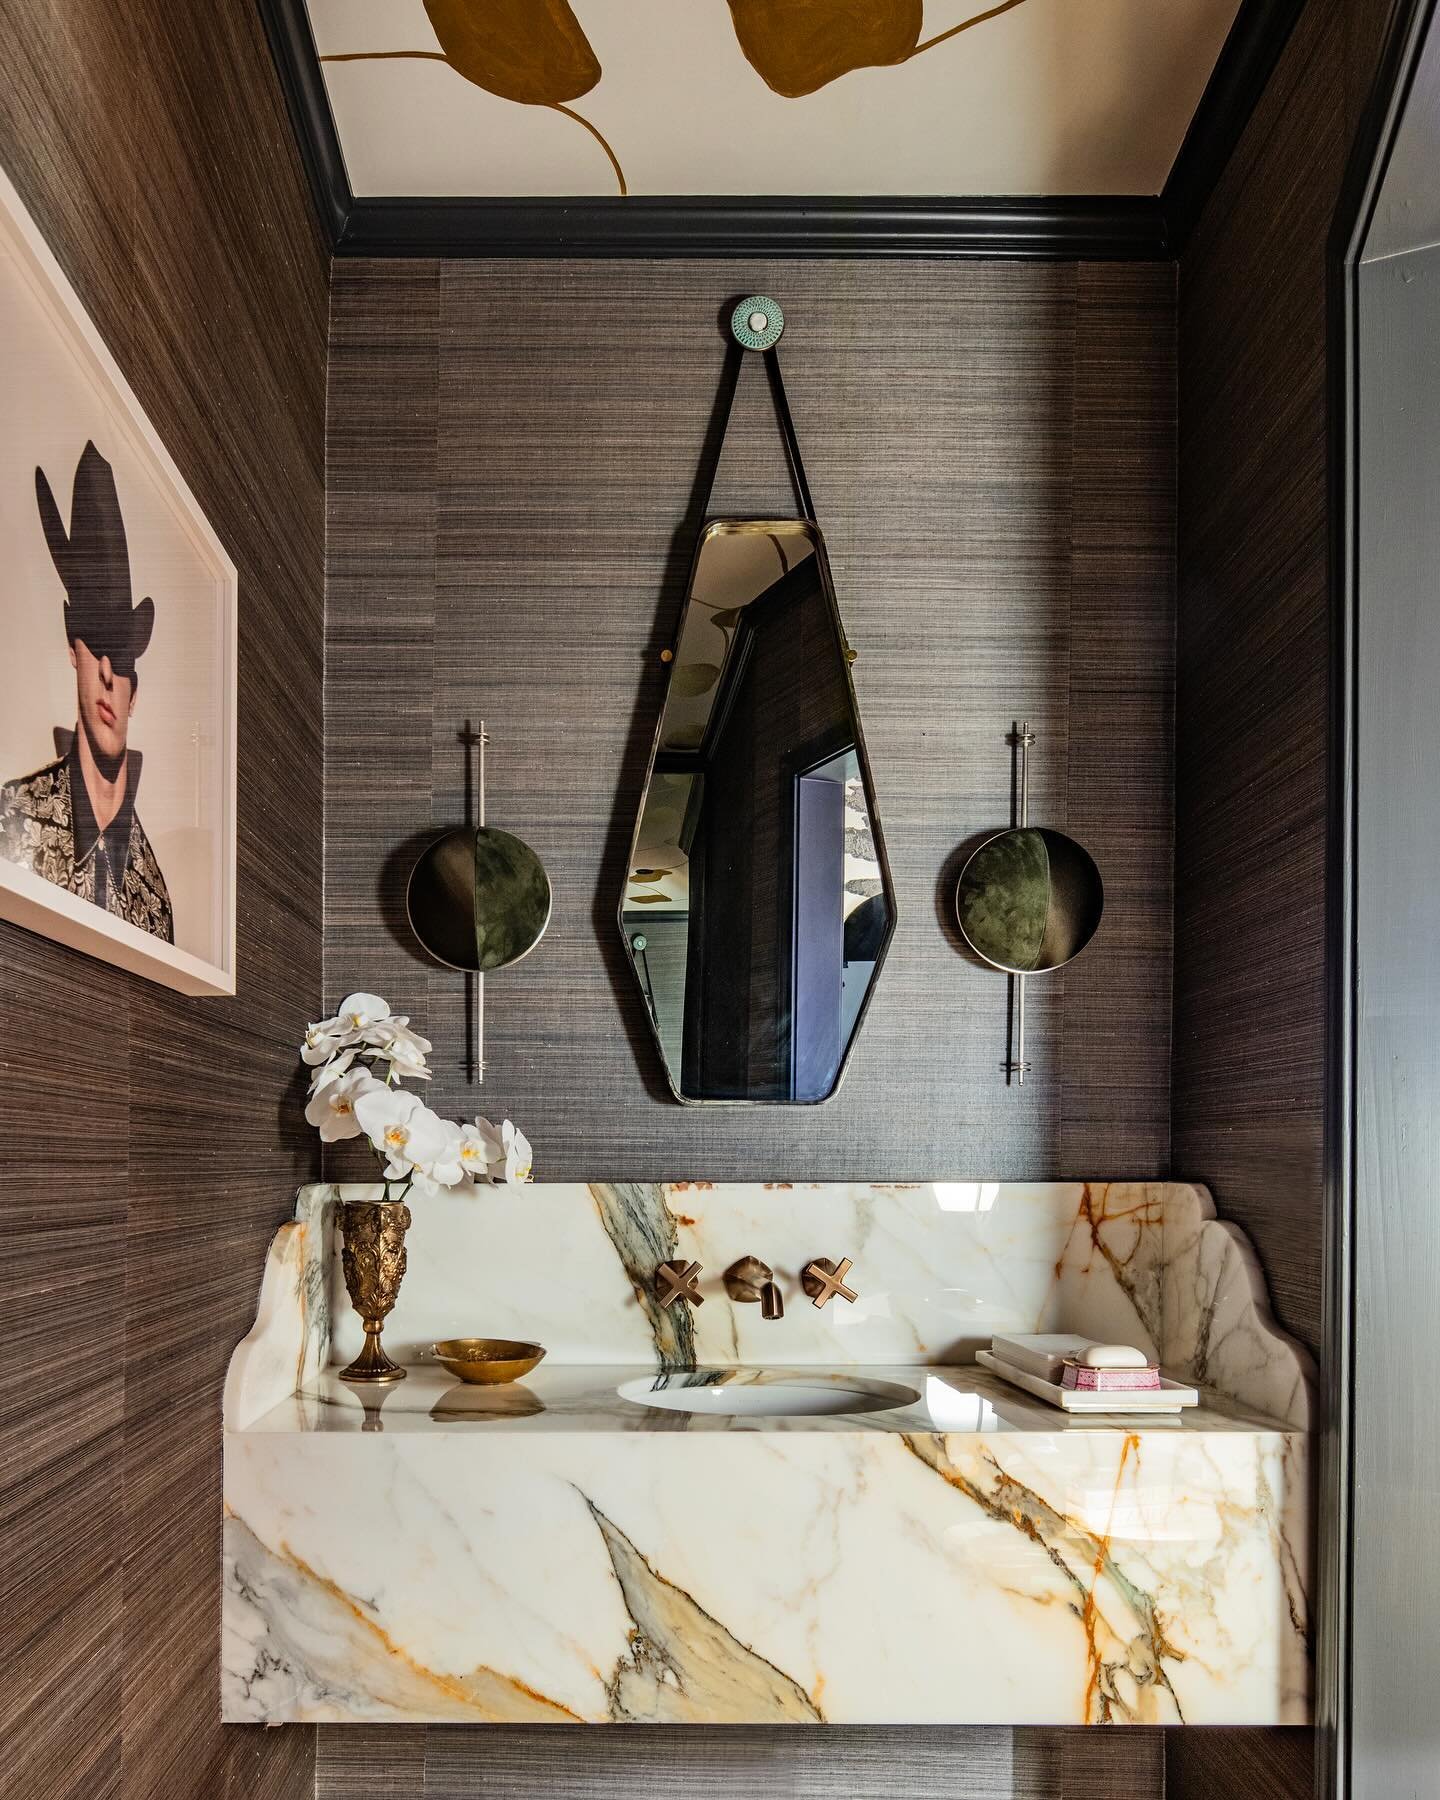 Saturday share 🤎Views from our @kbshowhouse Dallas powder room collaboration with @mlkstudio 🤎